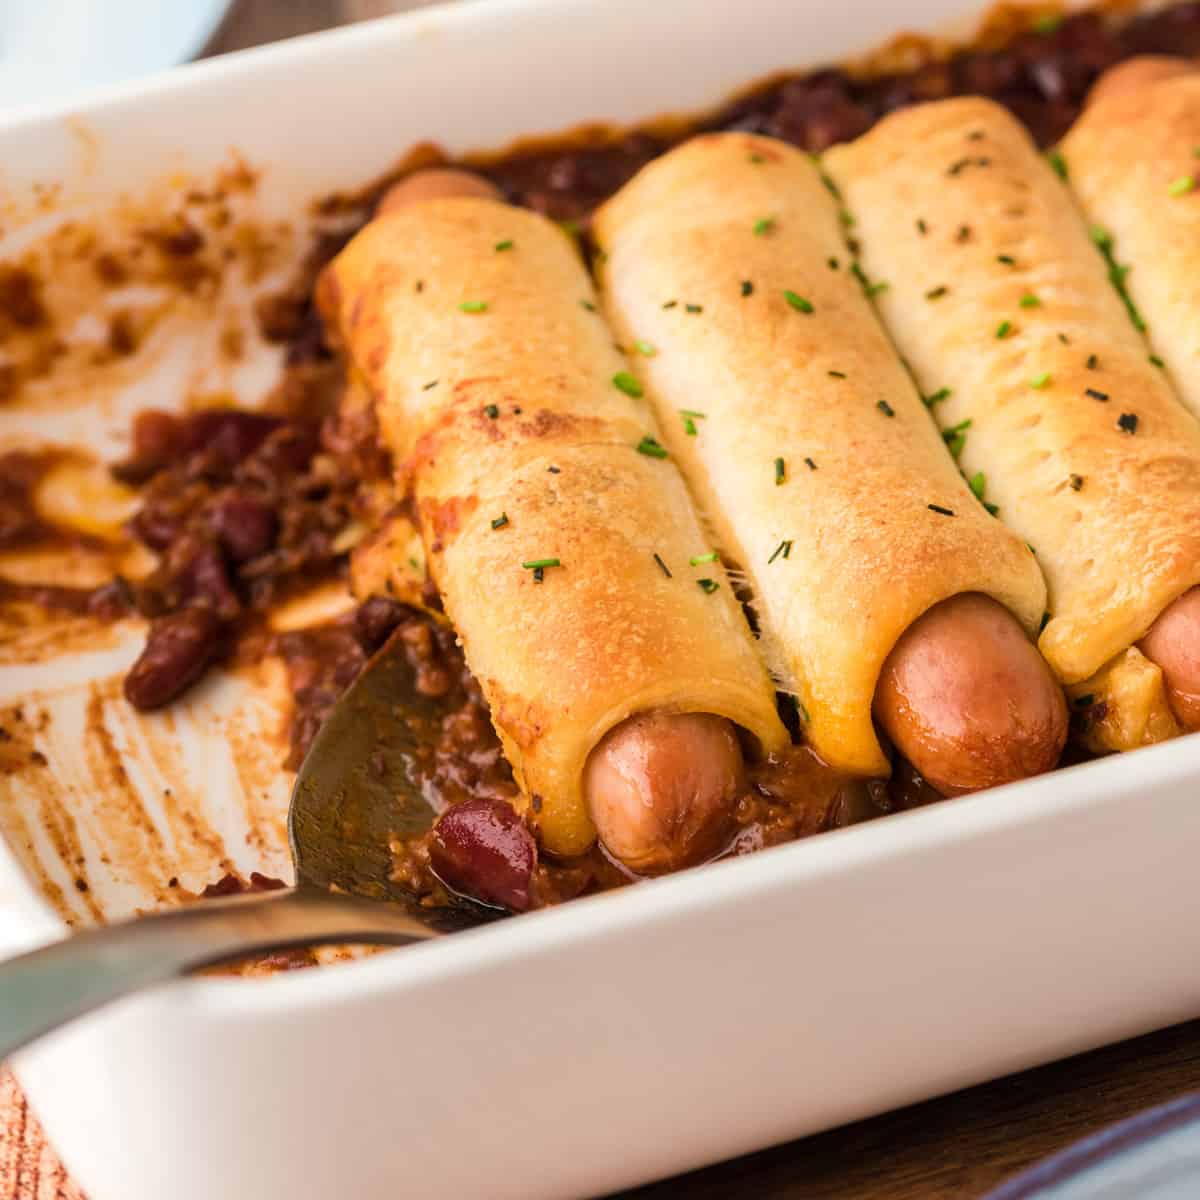 A pan full of chili corn dogs.